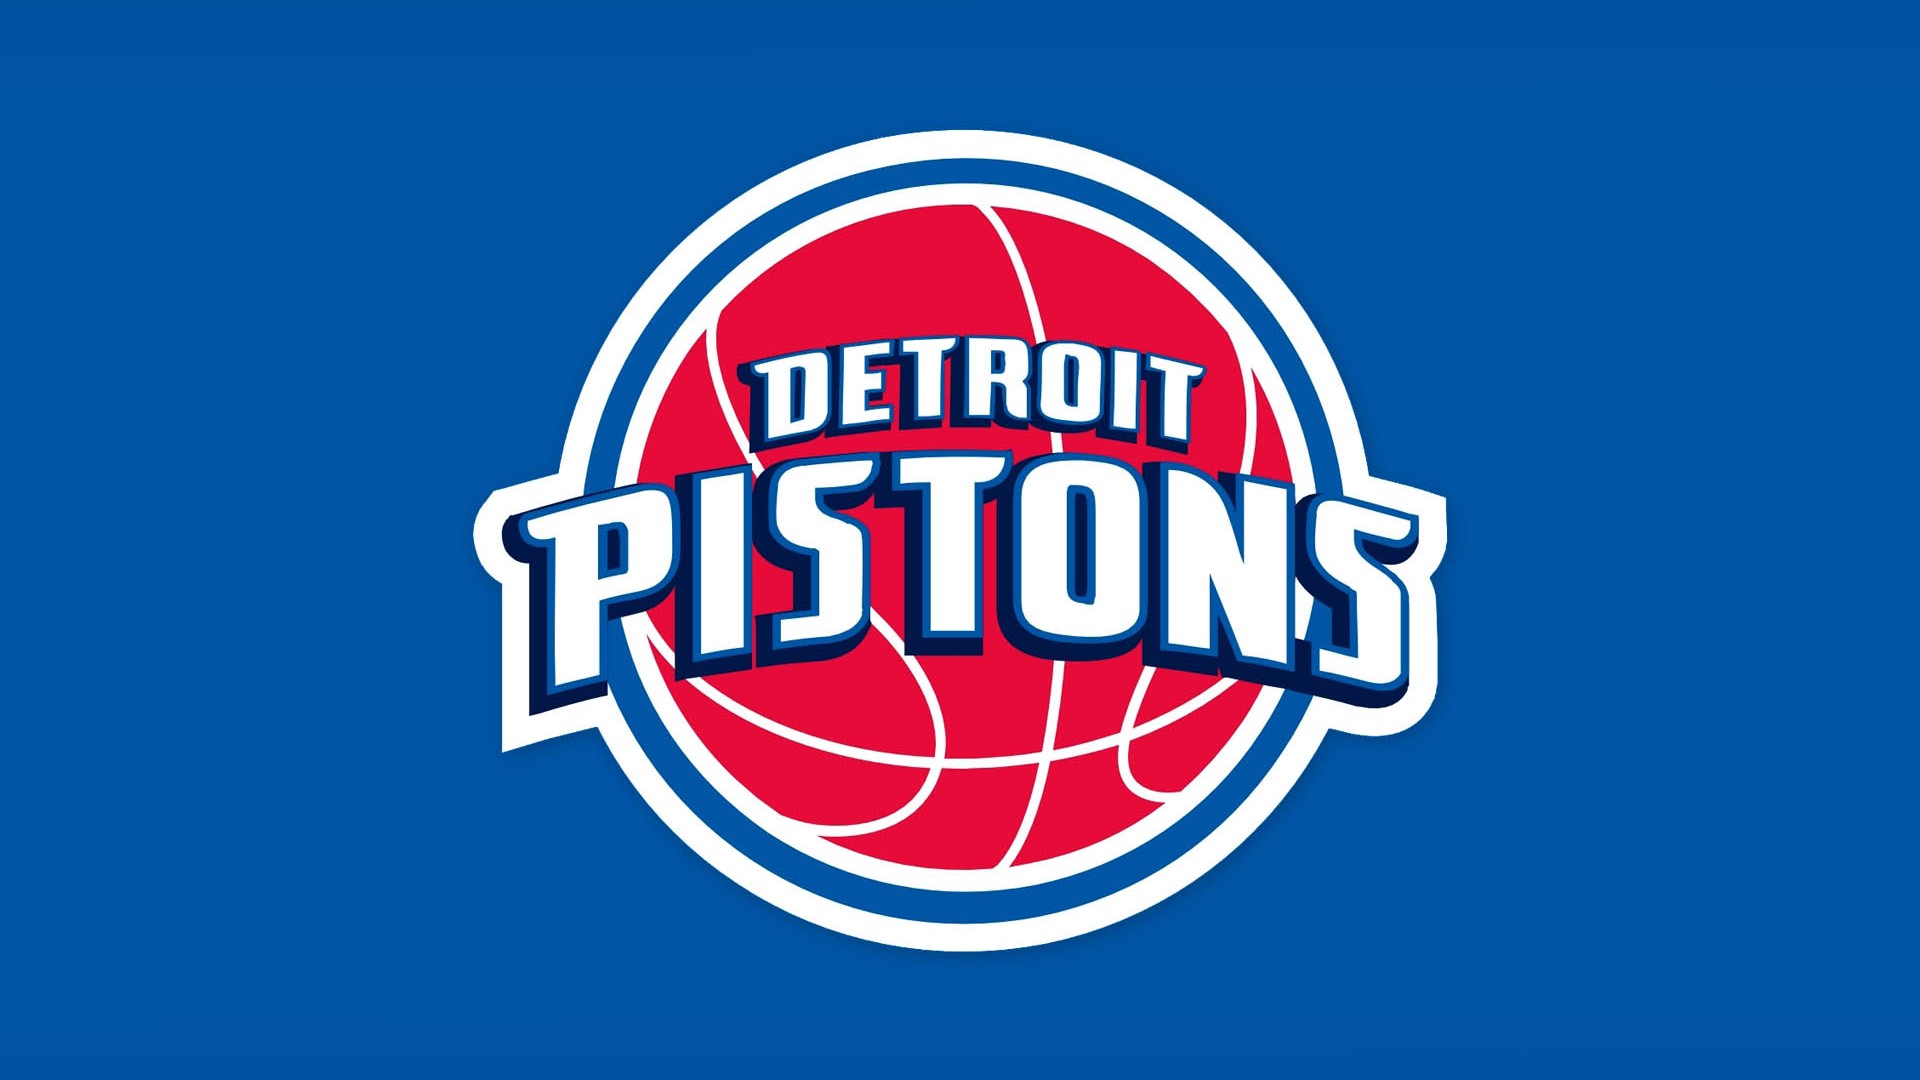 Detroit Pistons Wallpaper HD With Resolution 1920X1080